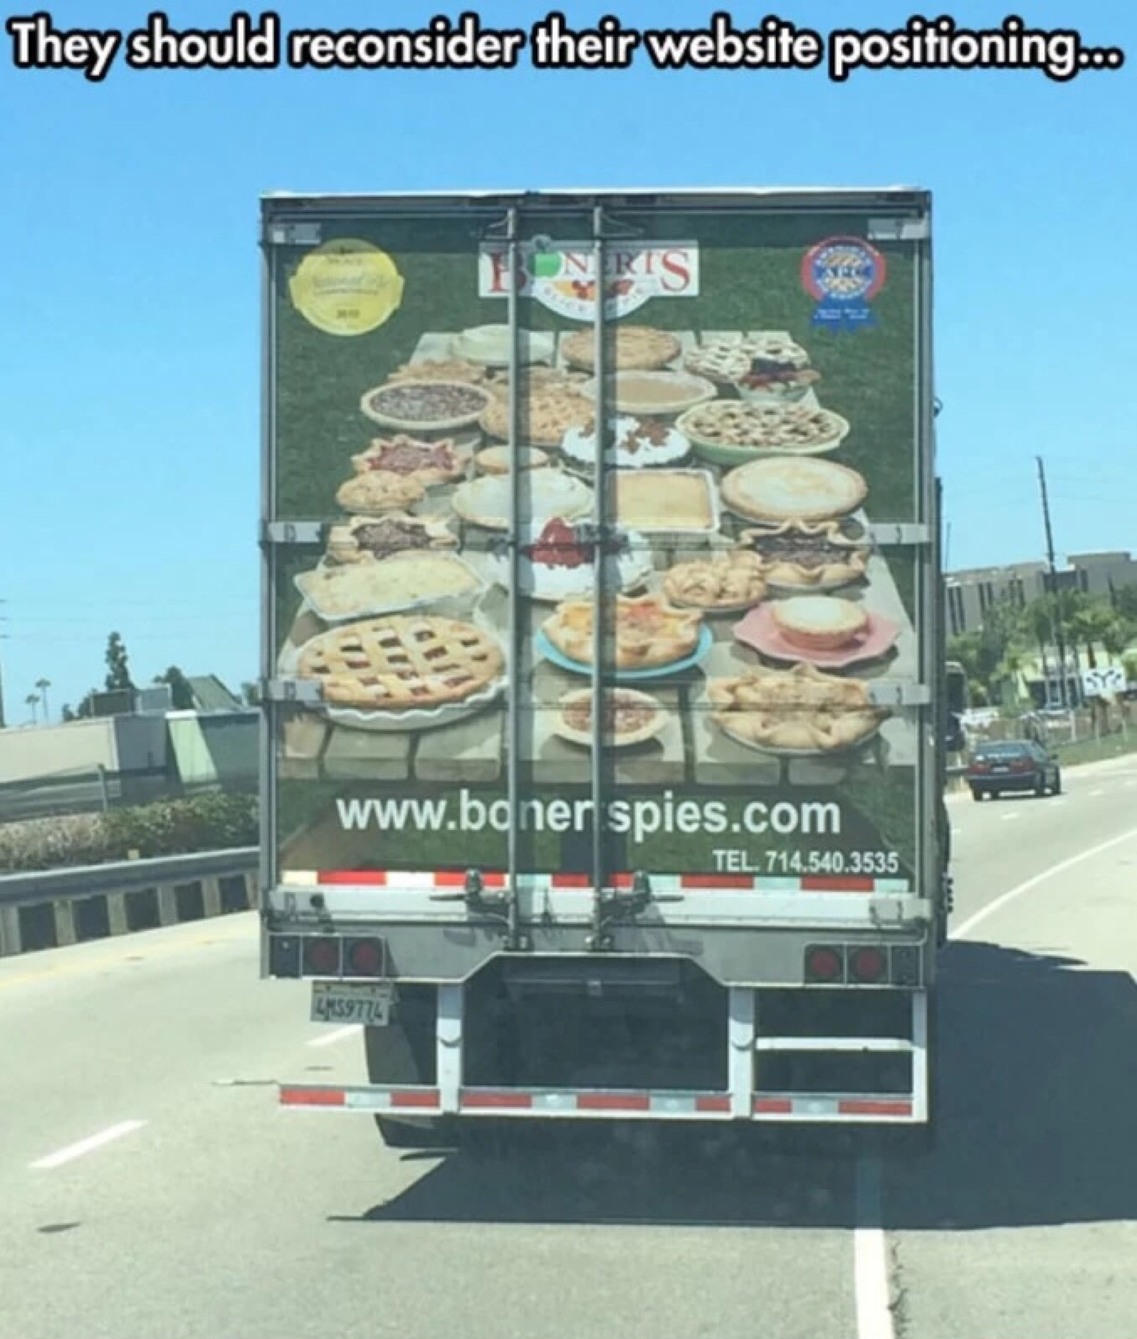 call me if you're interested in my boners pies - meme